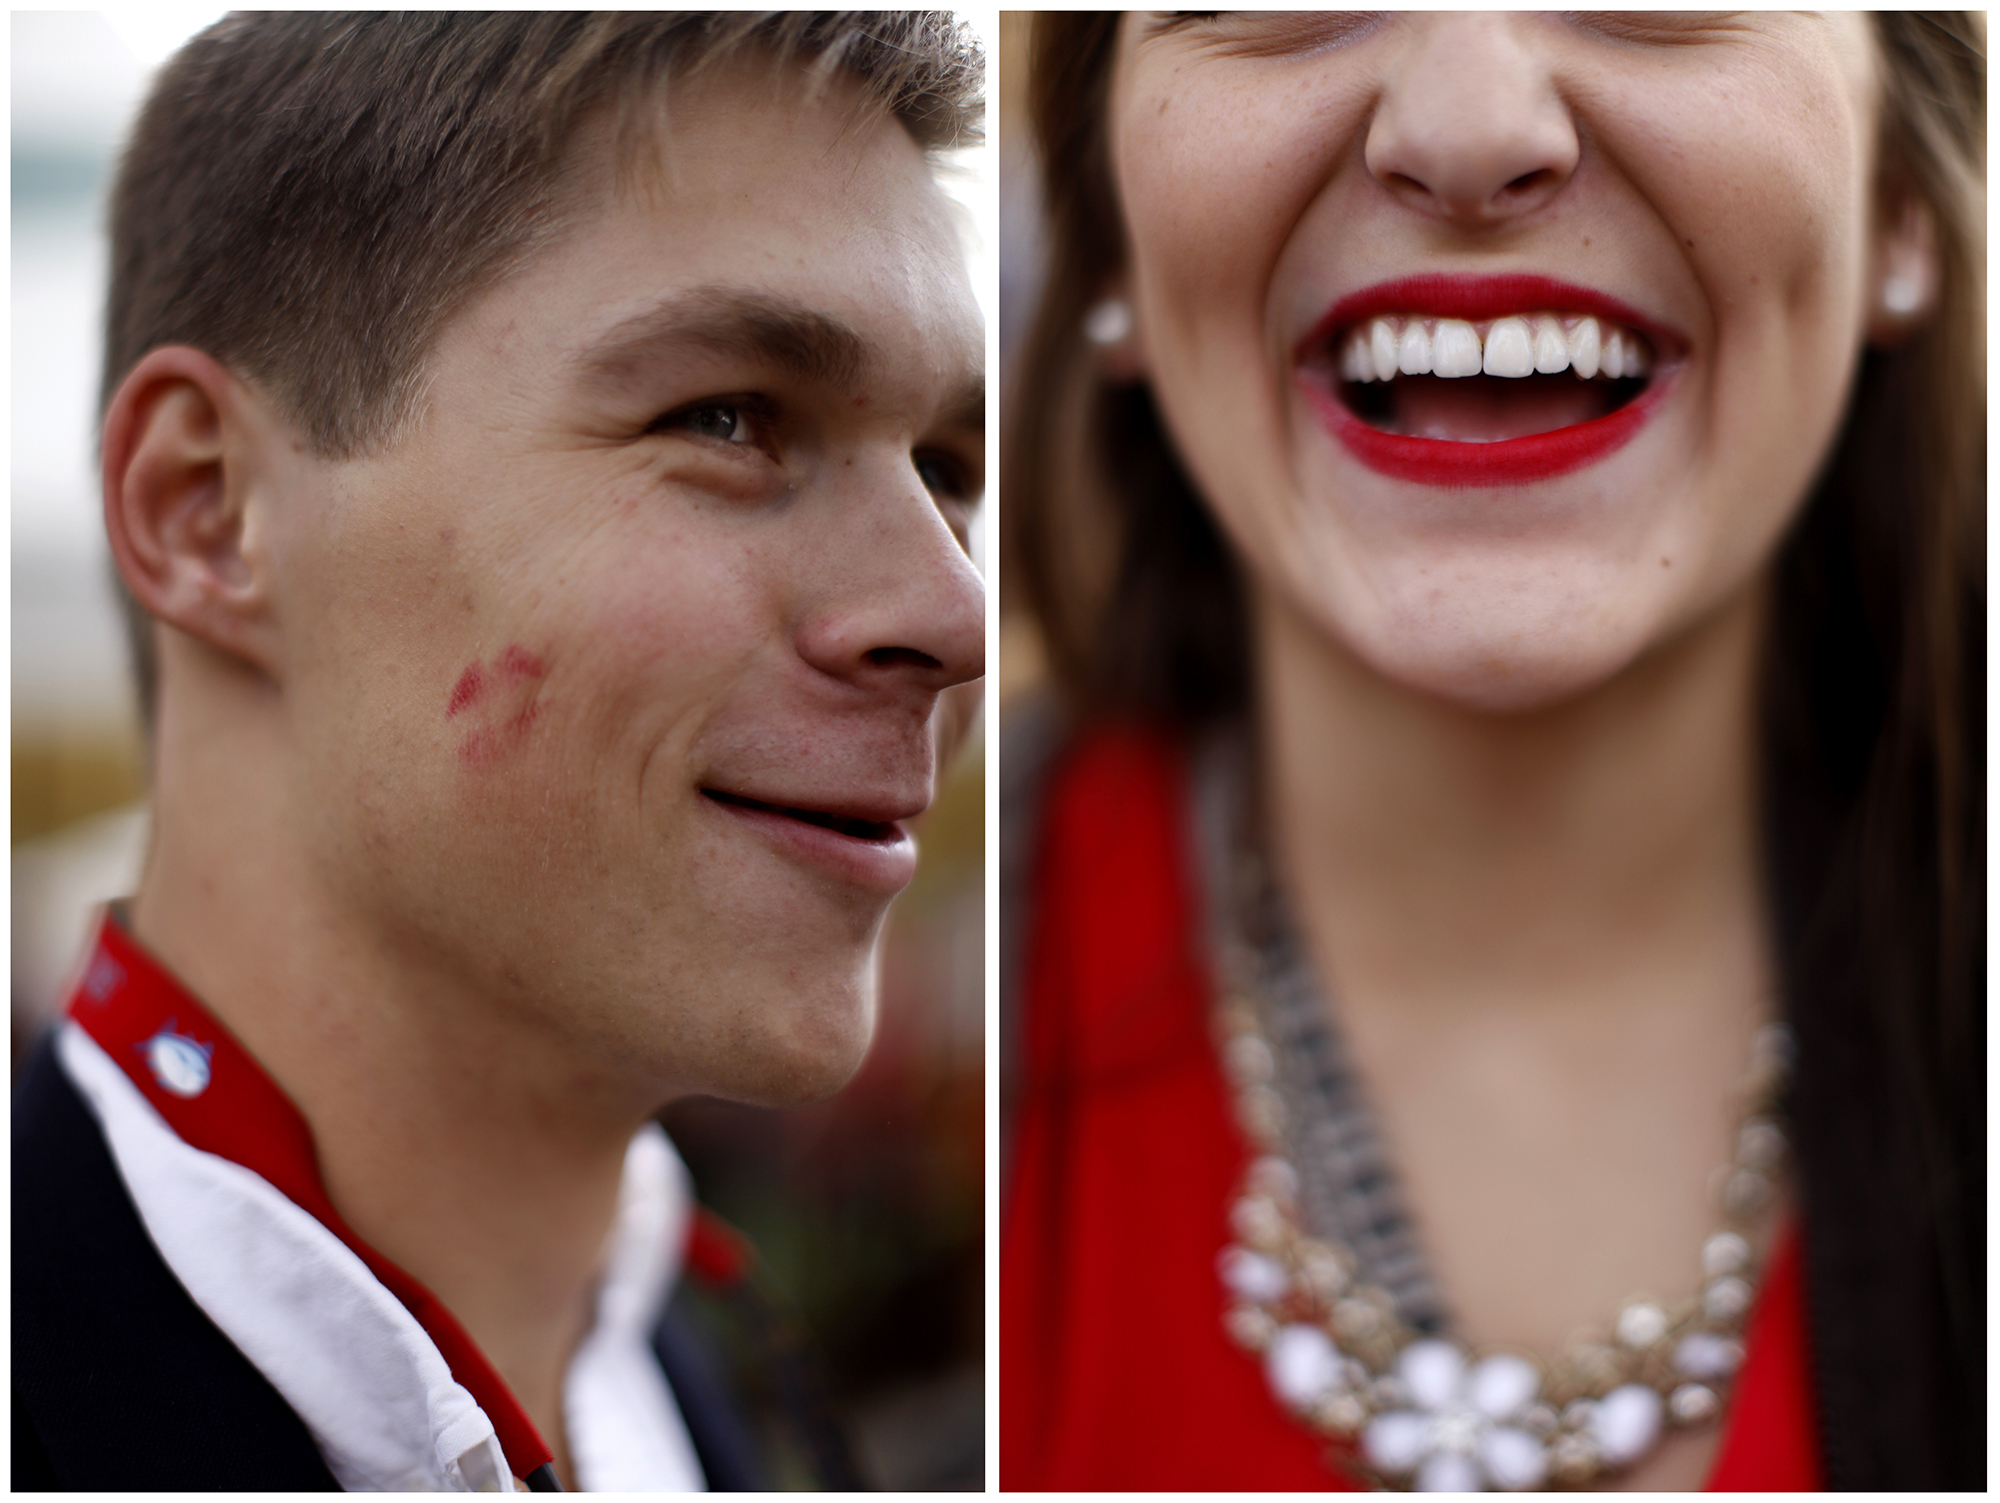  Left: Parker Kuhn, a Lexington junior and Fiji fraternity member, poses for a portrait during Homecoming tailgating on Saturday, Nov. 8, 2014. Right: Rose Damron, a Lexington sophomore, poses for a portrait during Homecoming tailgating on Saturday, 